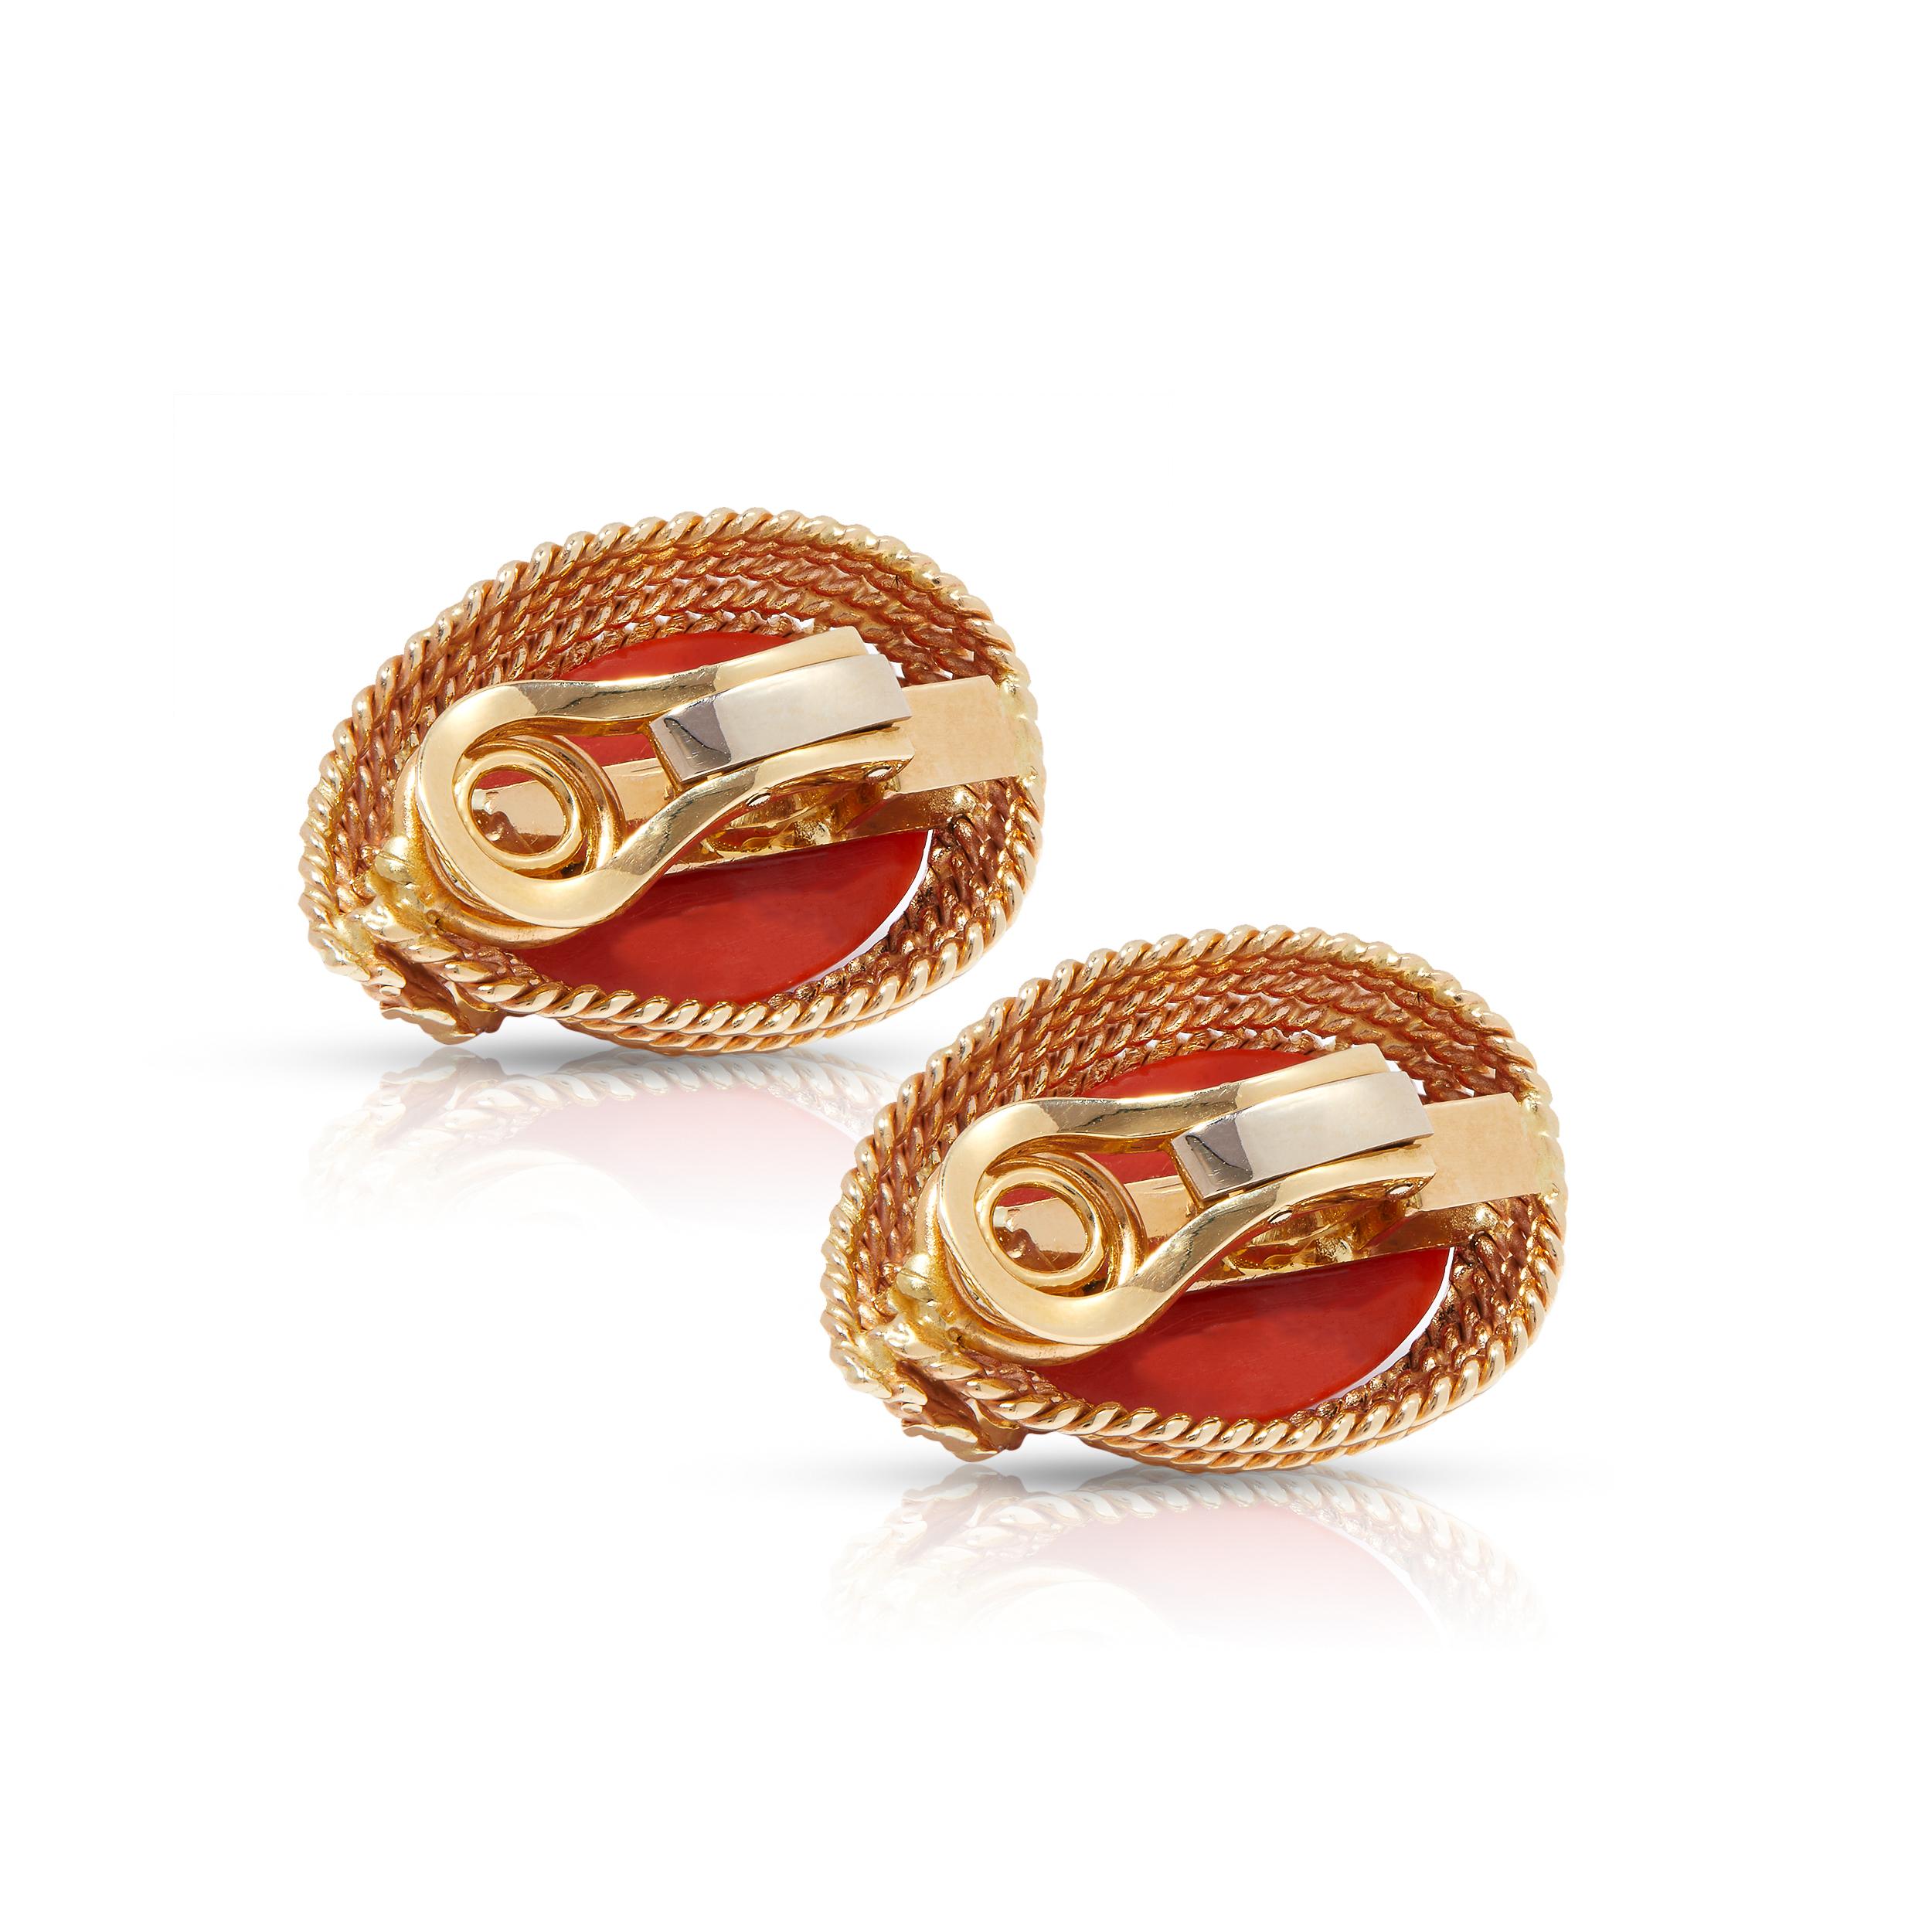 Brilliant Cut Designer Earrings with Gold Rope Twist and Coral Cabochons For Sale